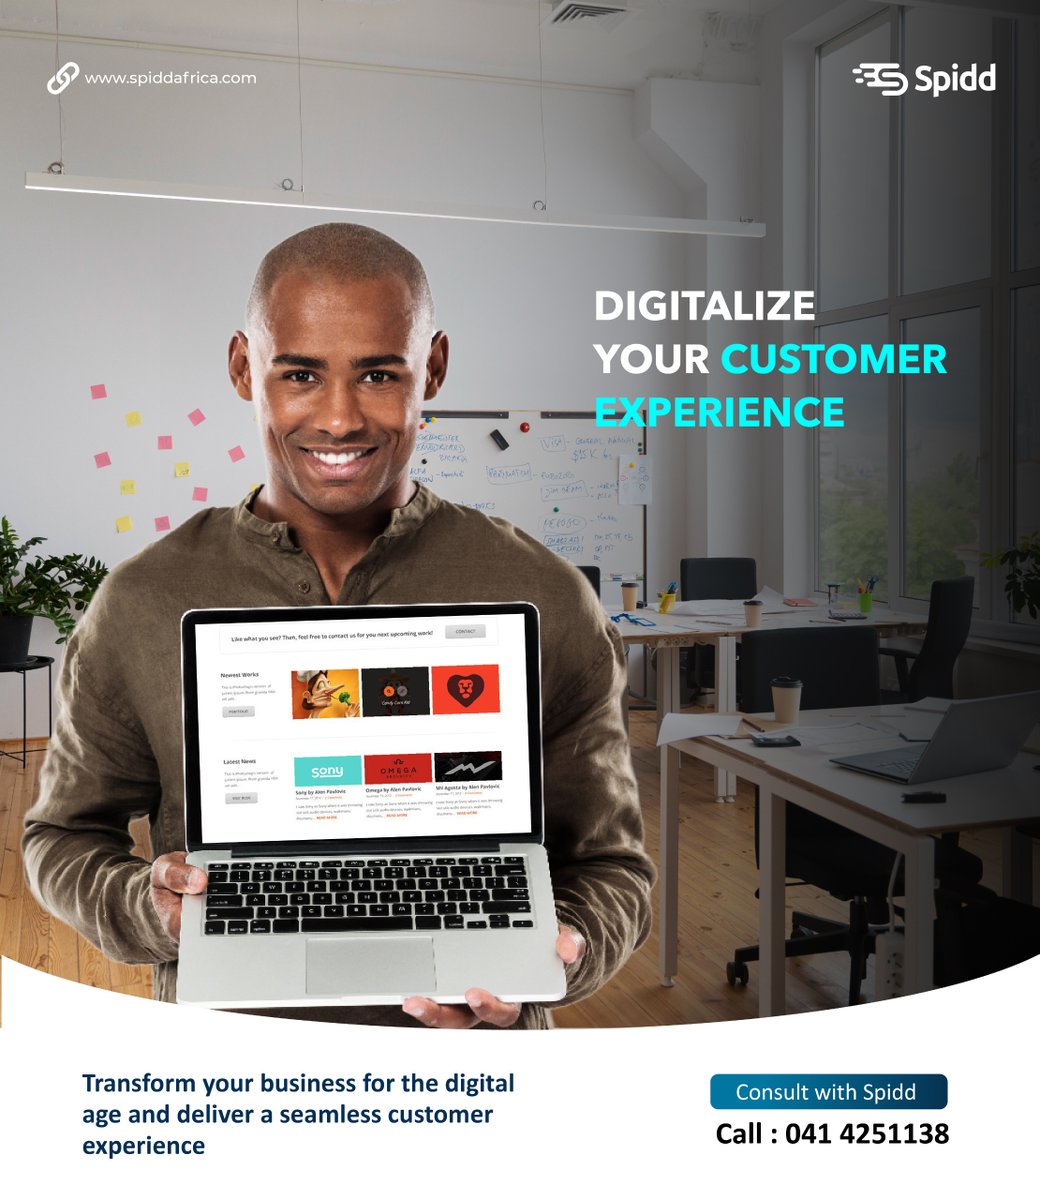 Transform your business for the digital age and deliver a seamless customer experience with Spidd Africa. Harness the power of technology to drive growth and innovation. Start a Journey with Spidd Africa, visit: spiddafrica.com or Call: 041 4251138